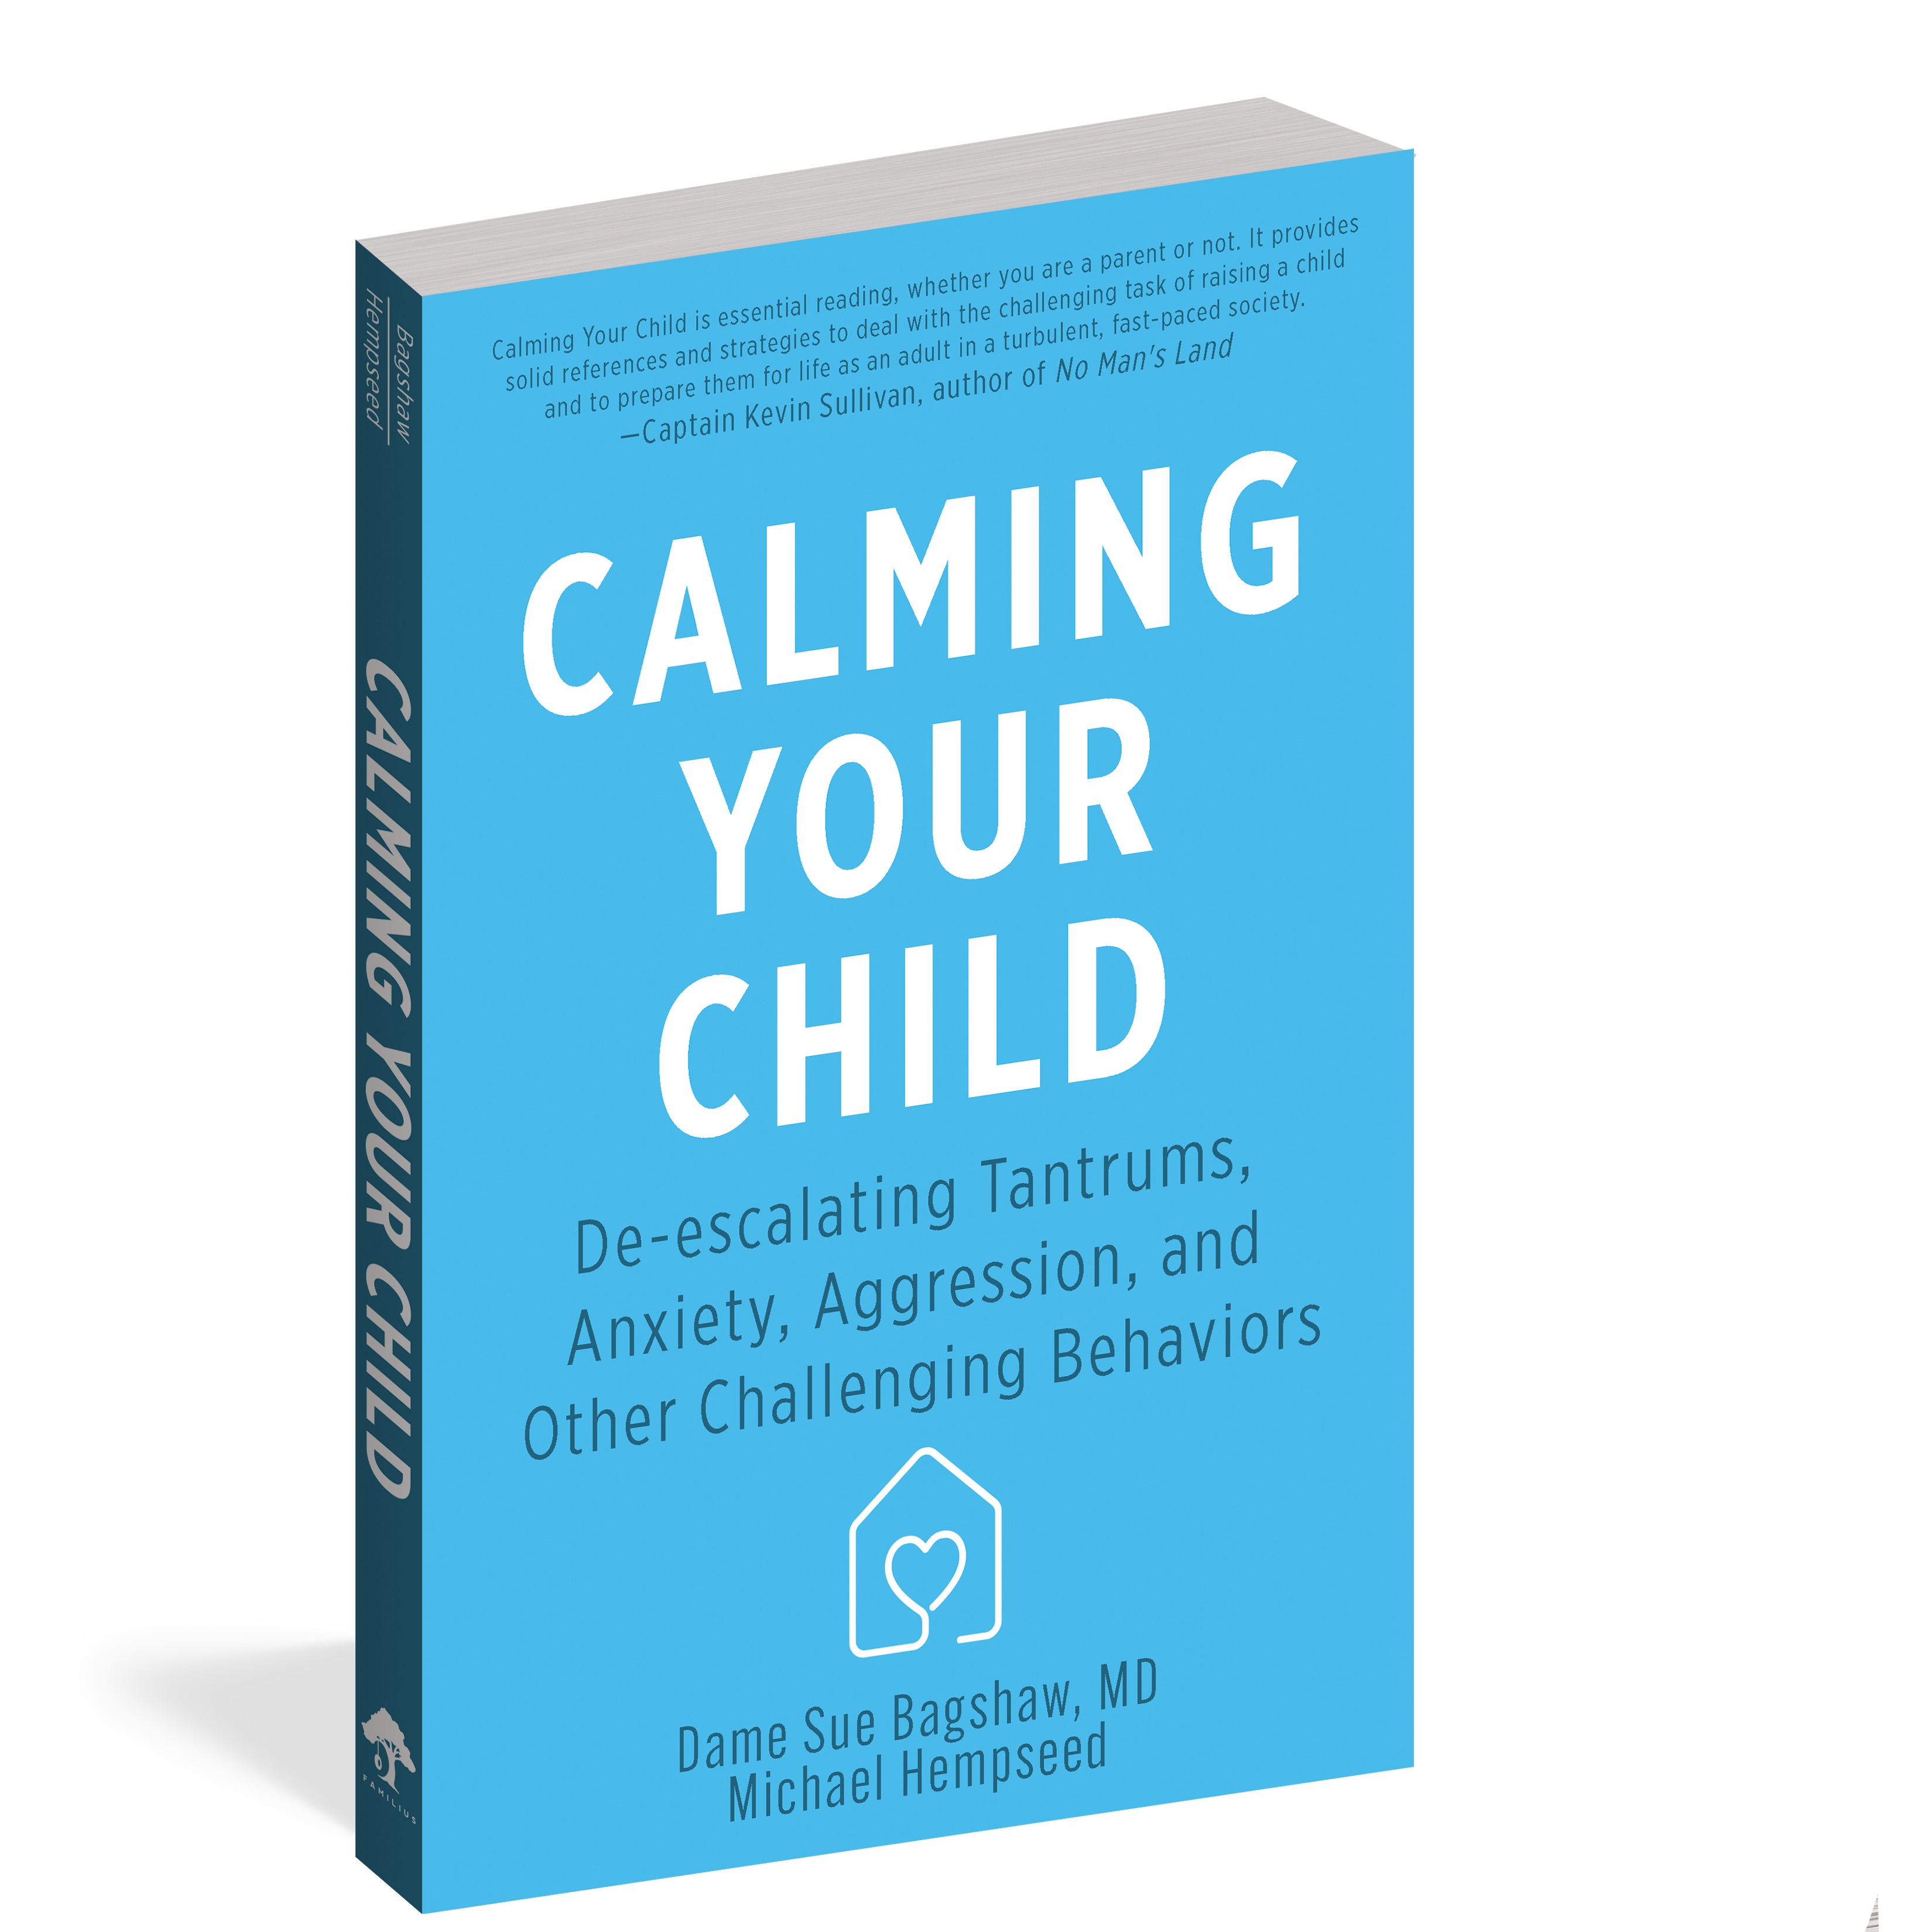 The cover of the book Calming Your Child.